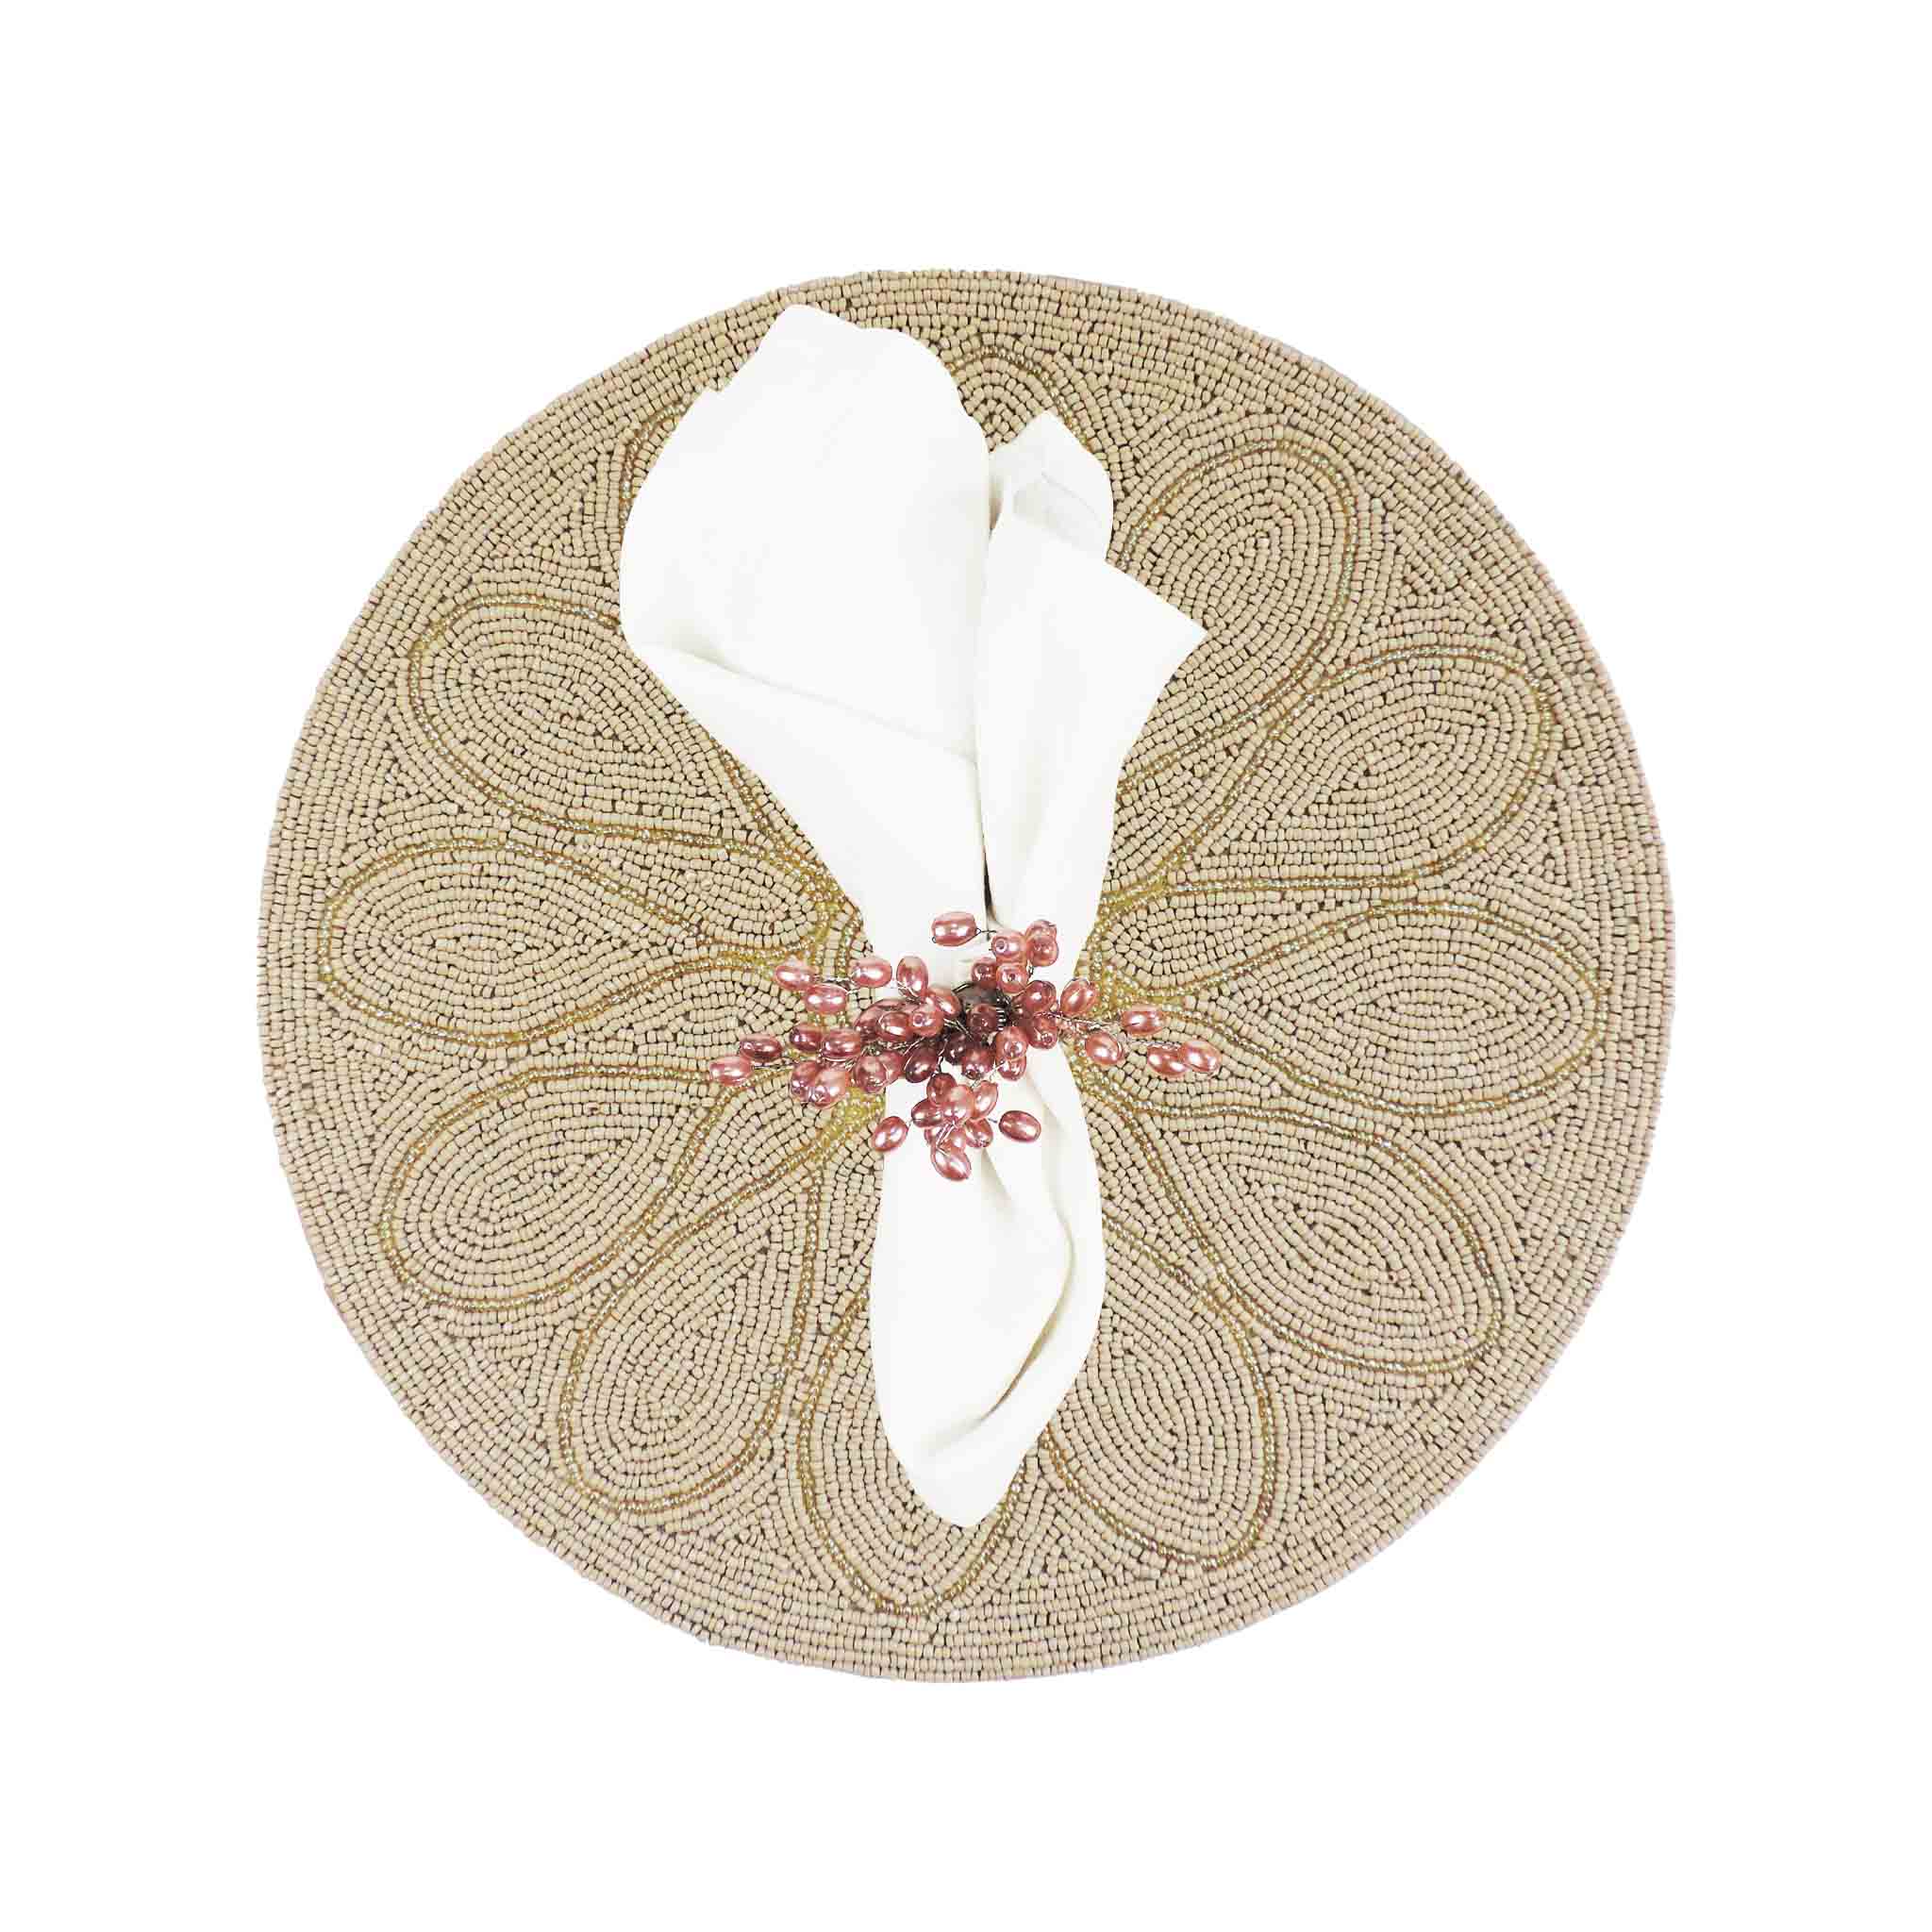 Petal Impressions Bead Embroidered Placemat in Dusty Pink, Set of 2/4